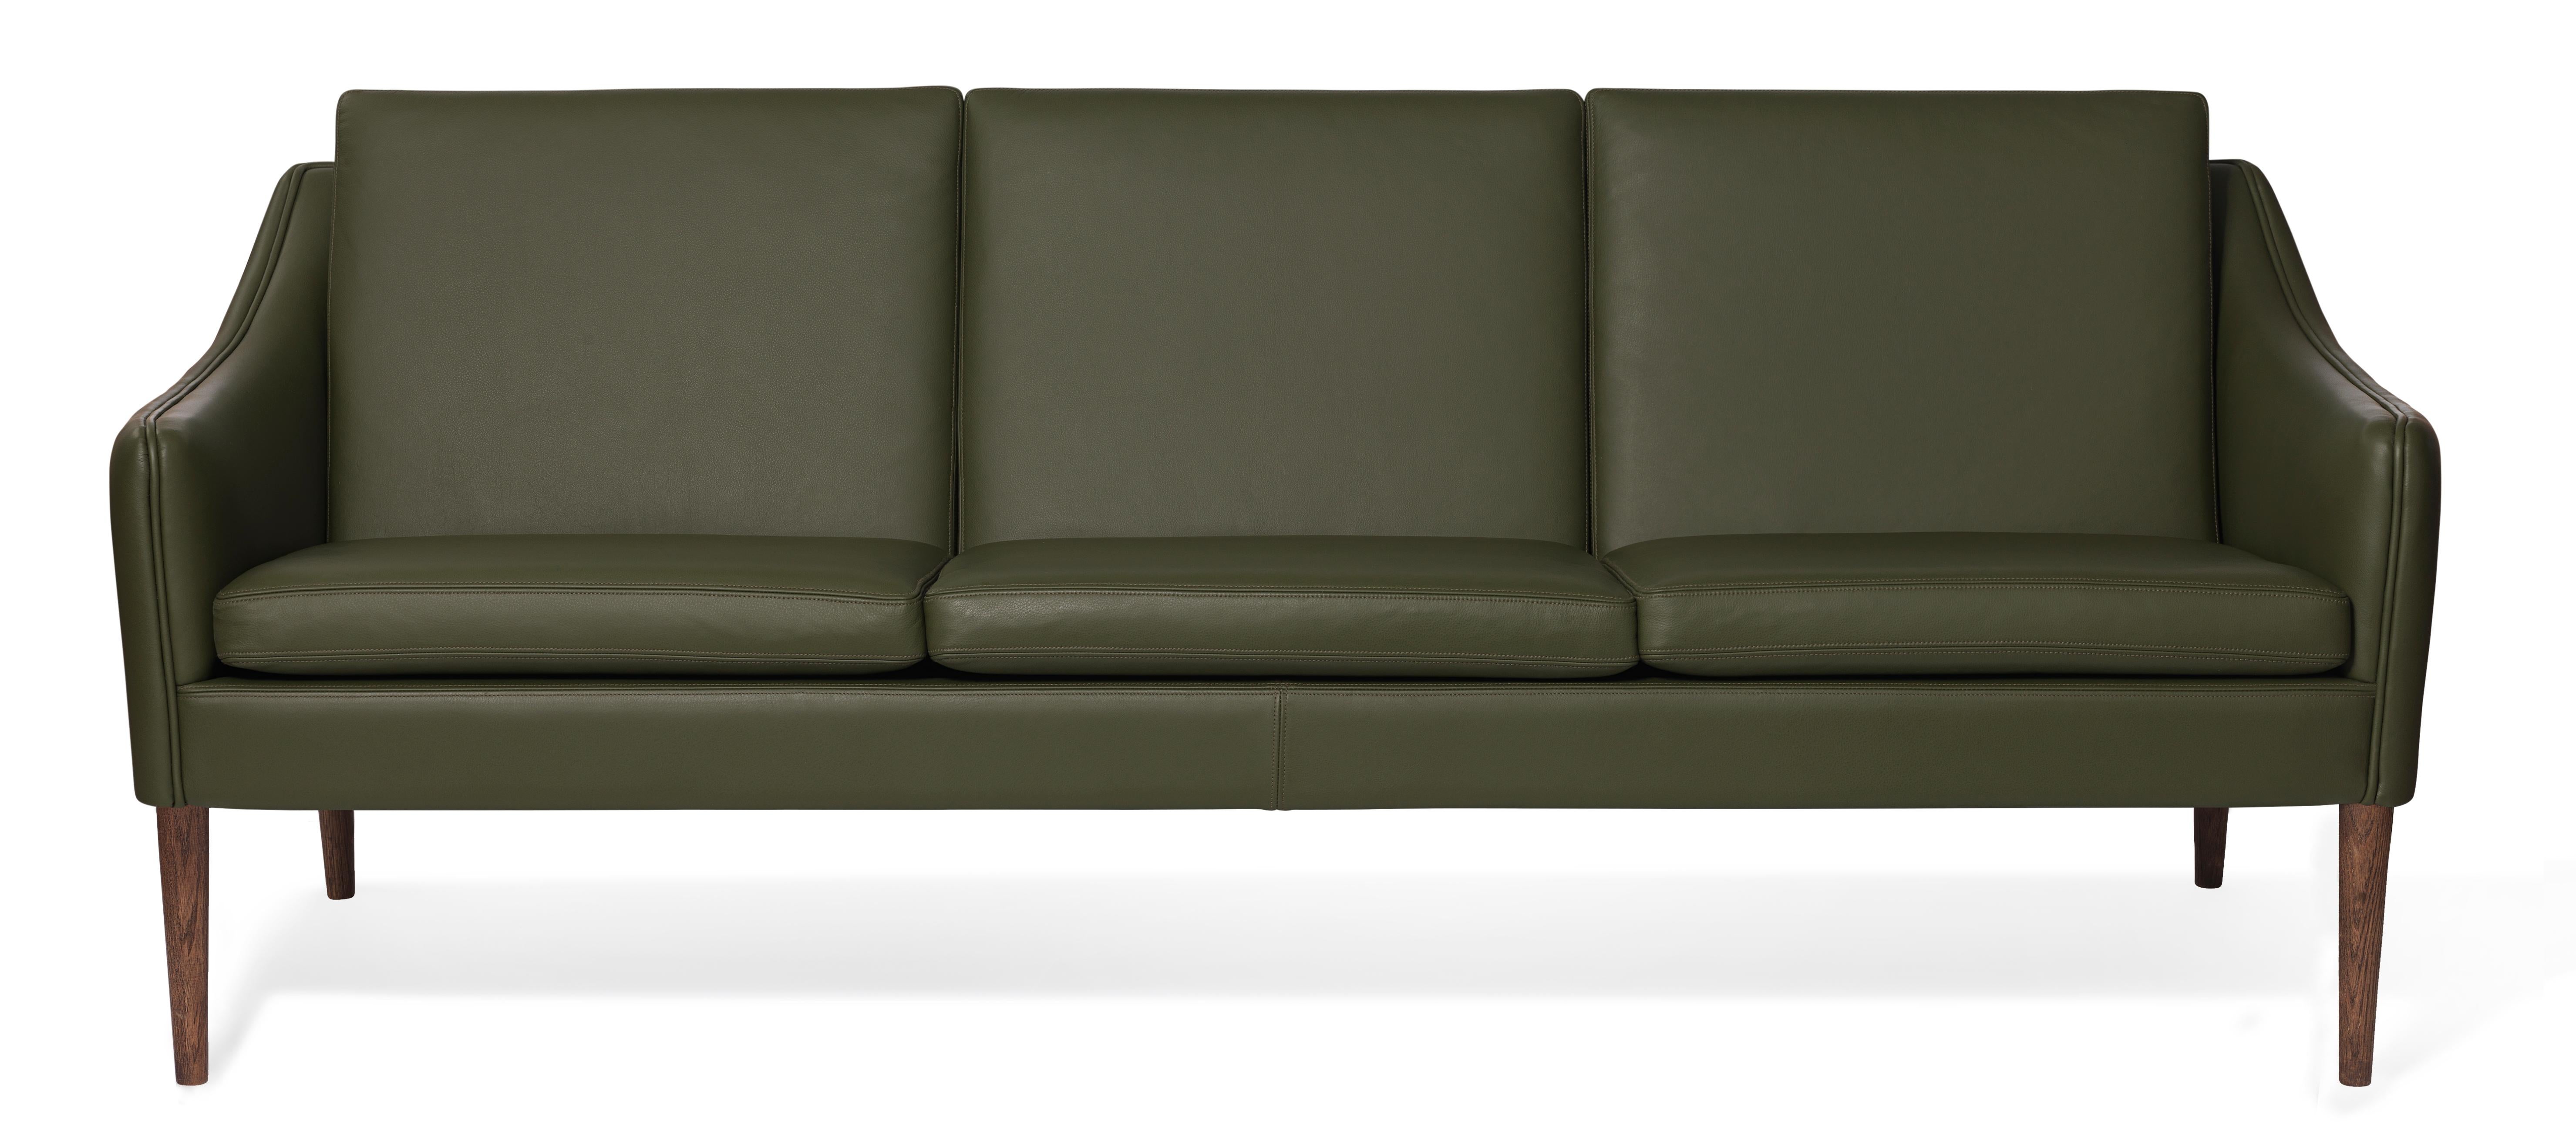 For Sale: Green (Challenger Pickle green) Mr. Olsen 3-Seat Sofa with Smoked Oak Legs, by Hans Olsen from Warm Nordic